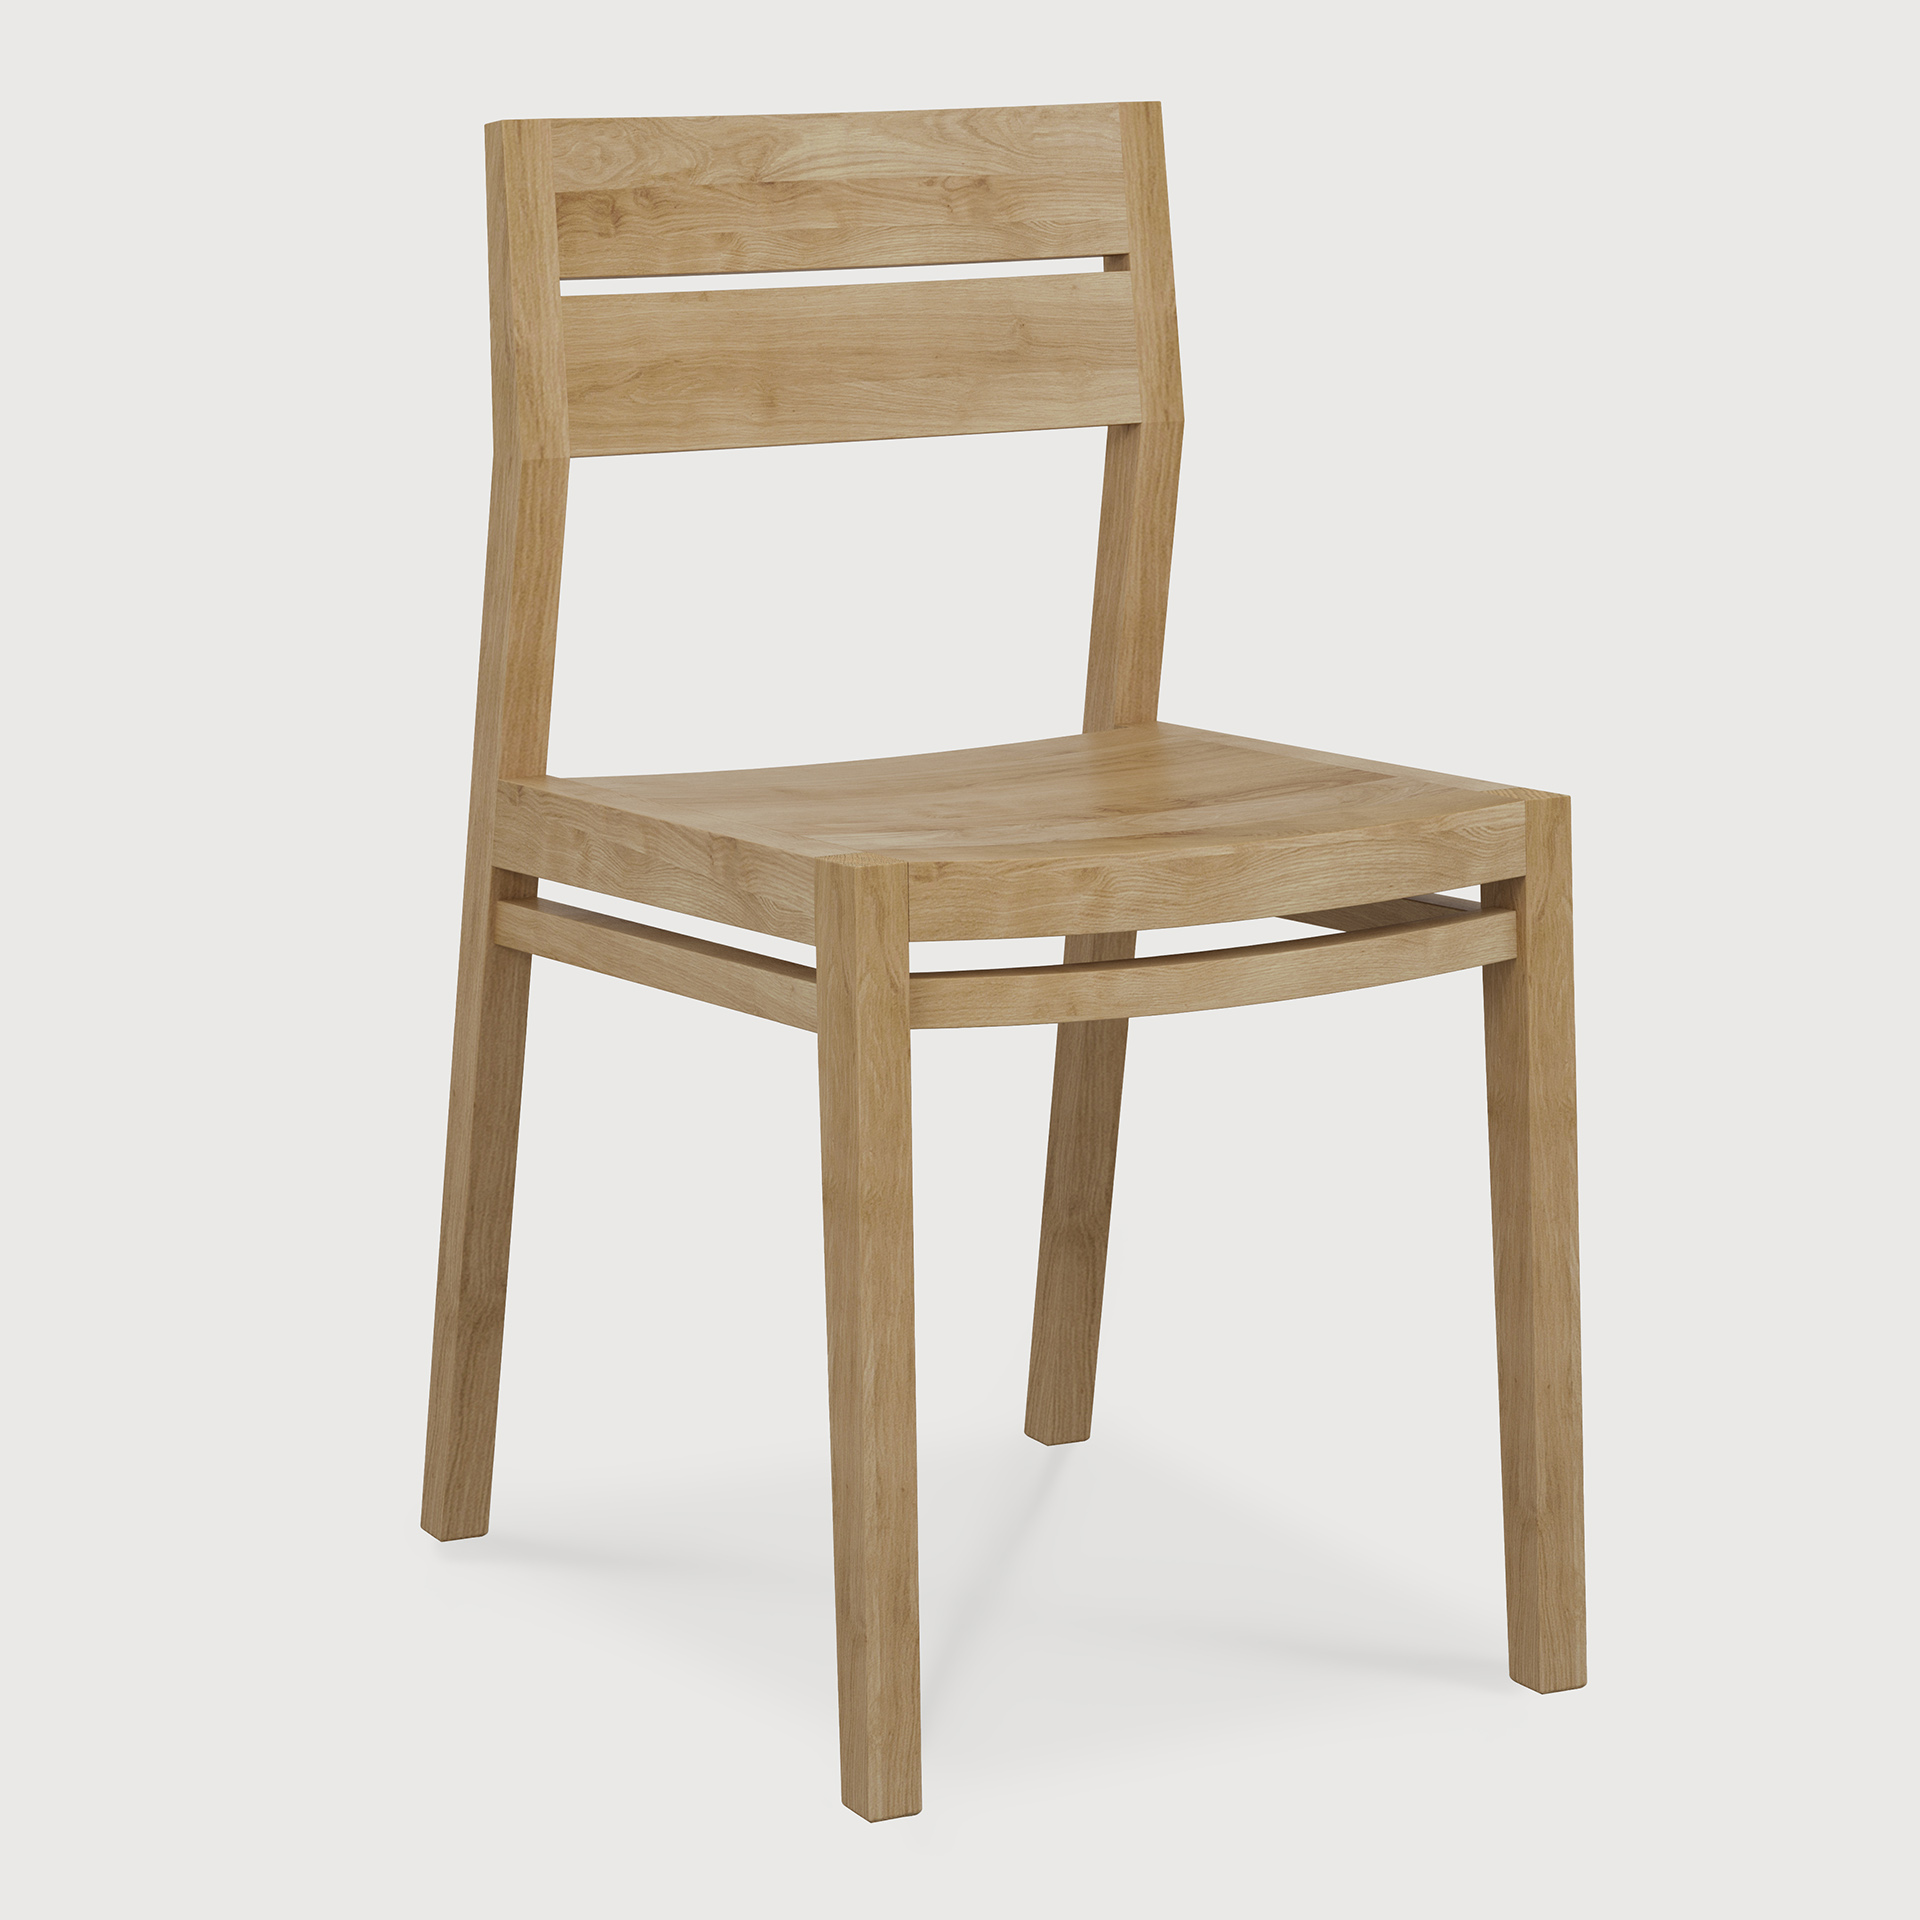 [50657*] Ex 1 dining chair - contract grade (Oiled)